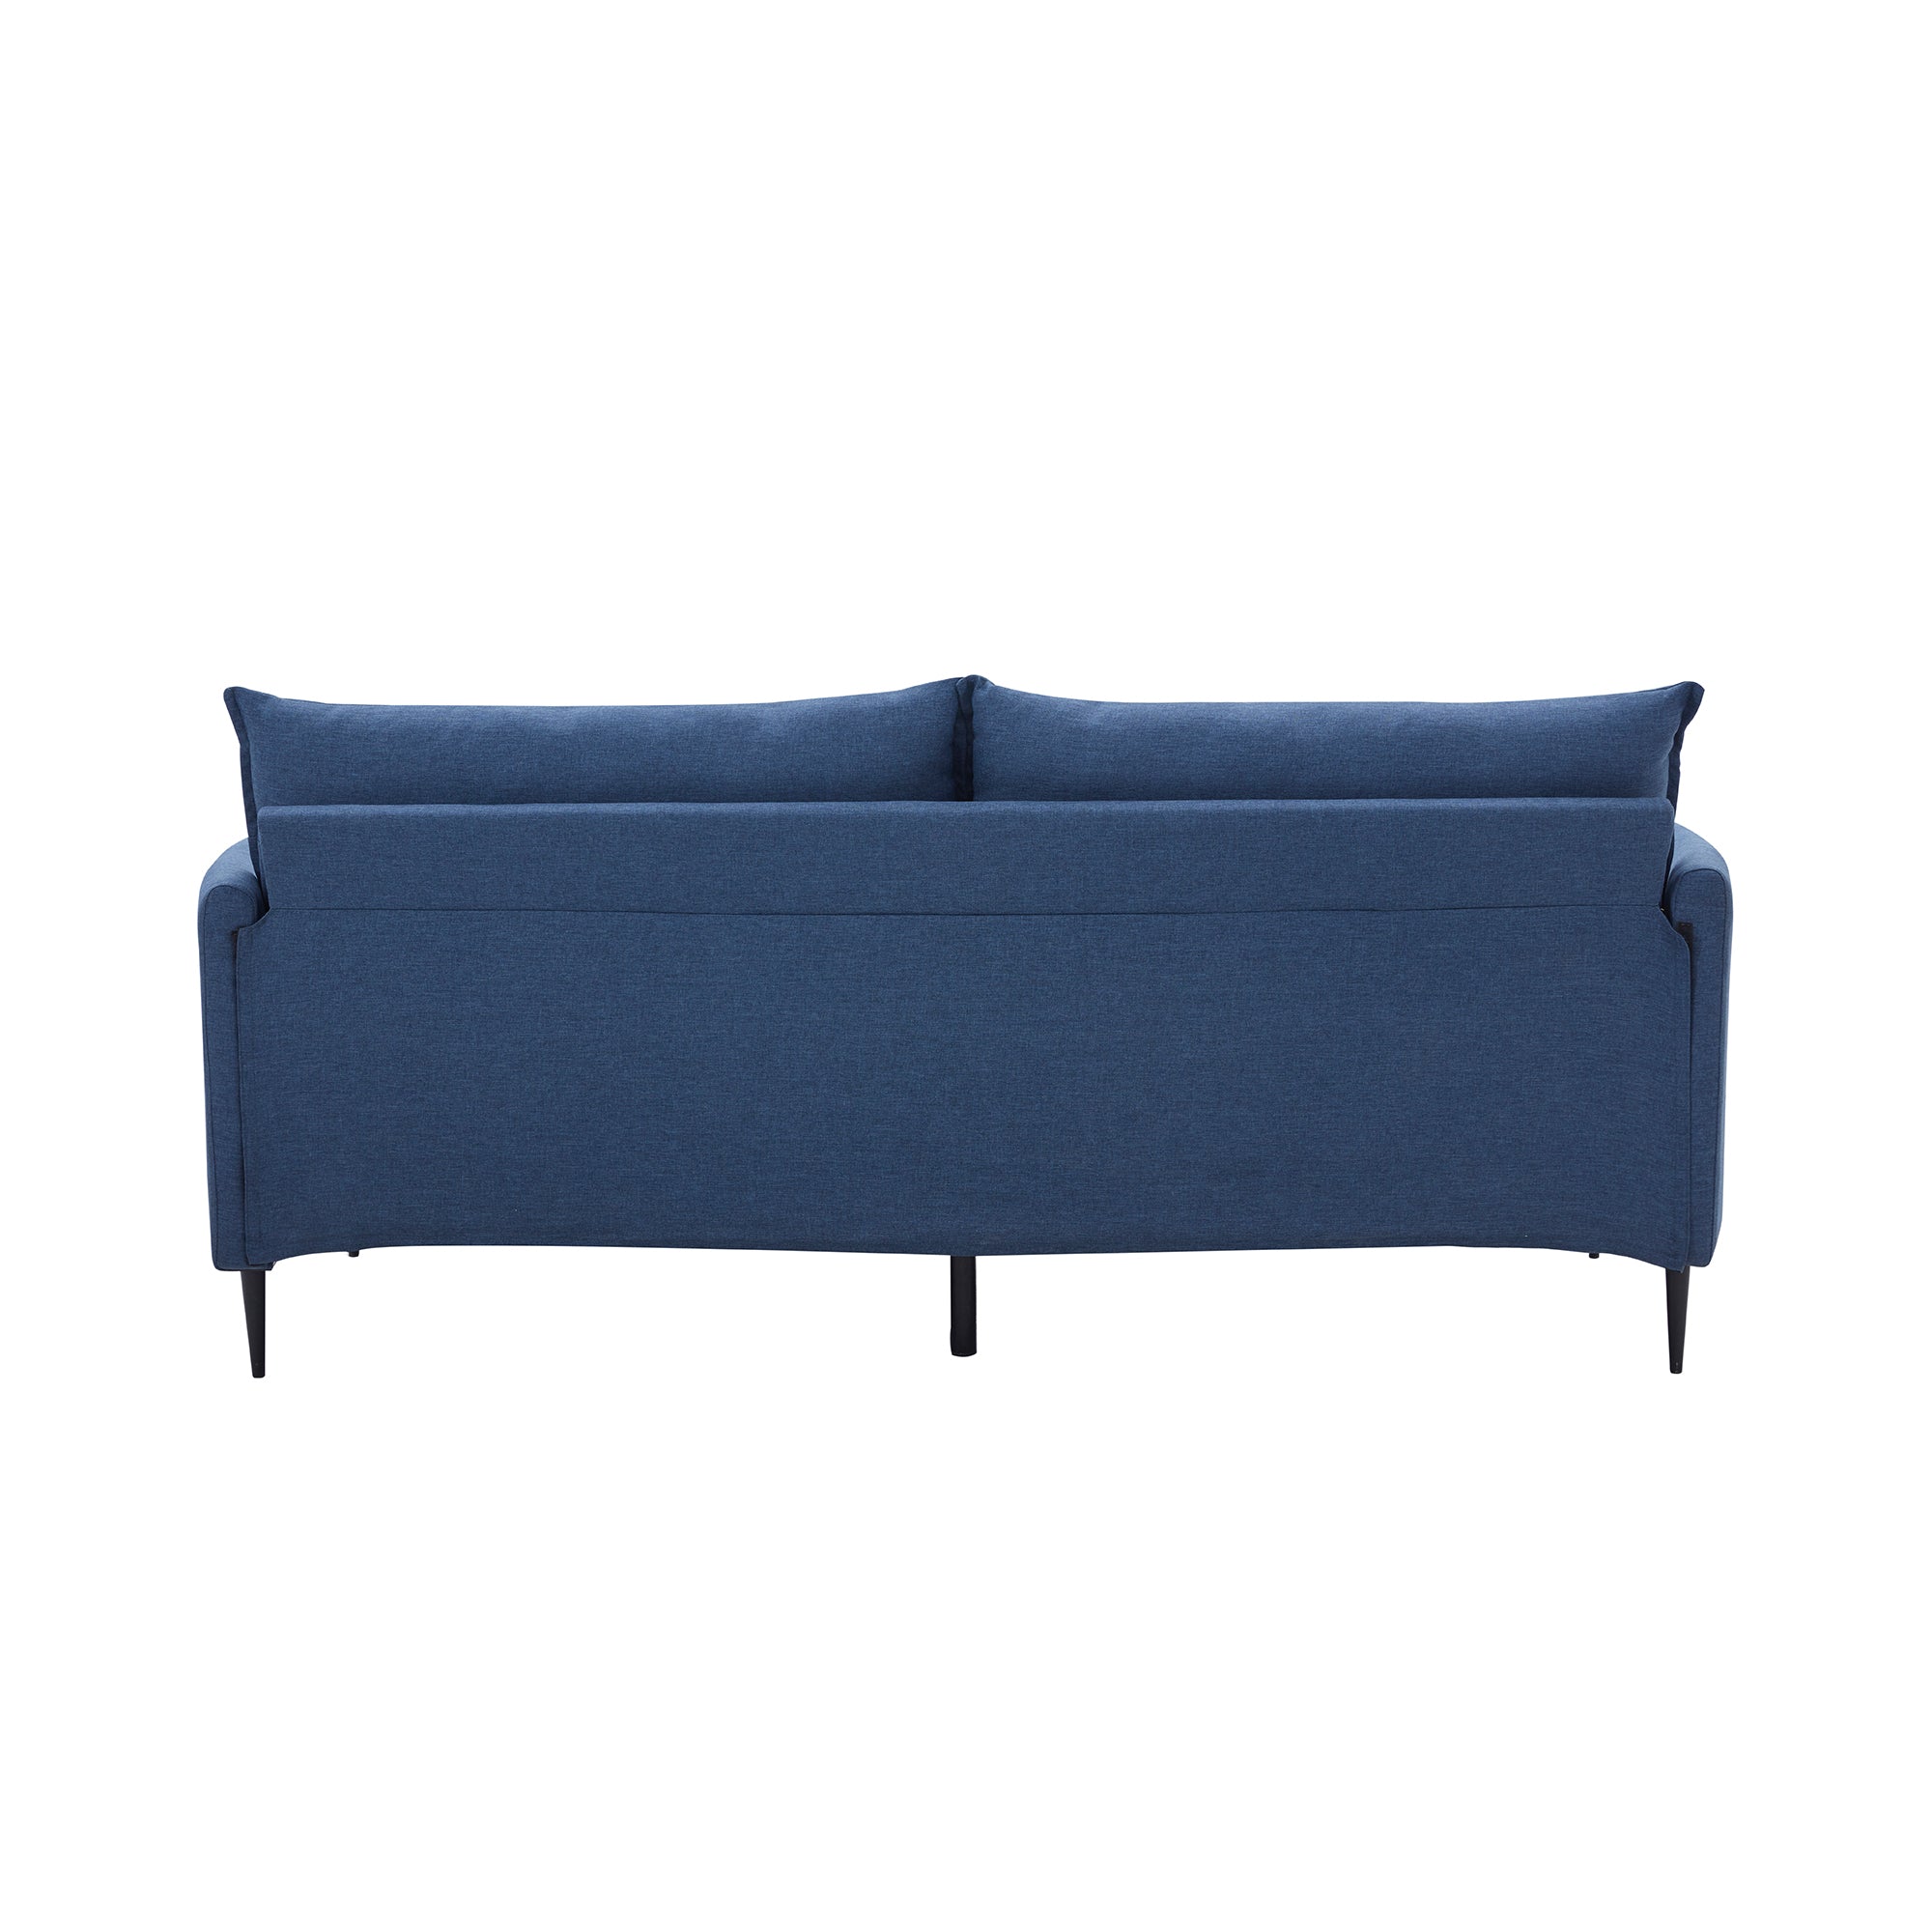 RaDEWAY 65.8" Modern Design Couch Soft Linen Upholstery Loveseat for Compact Living Space